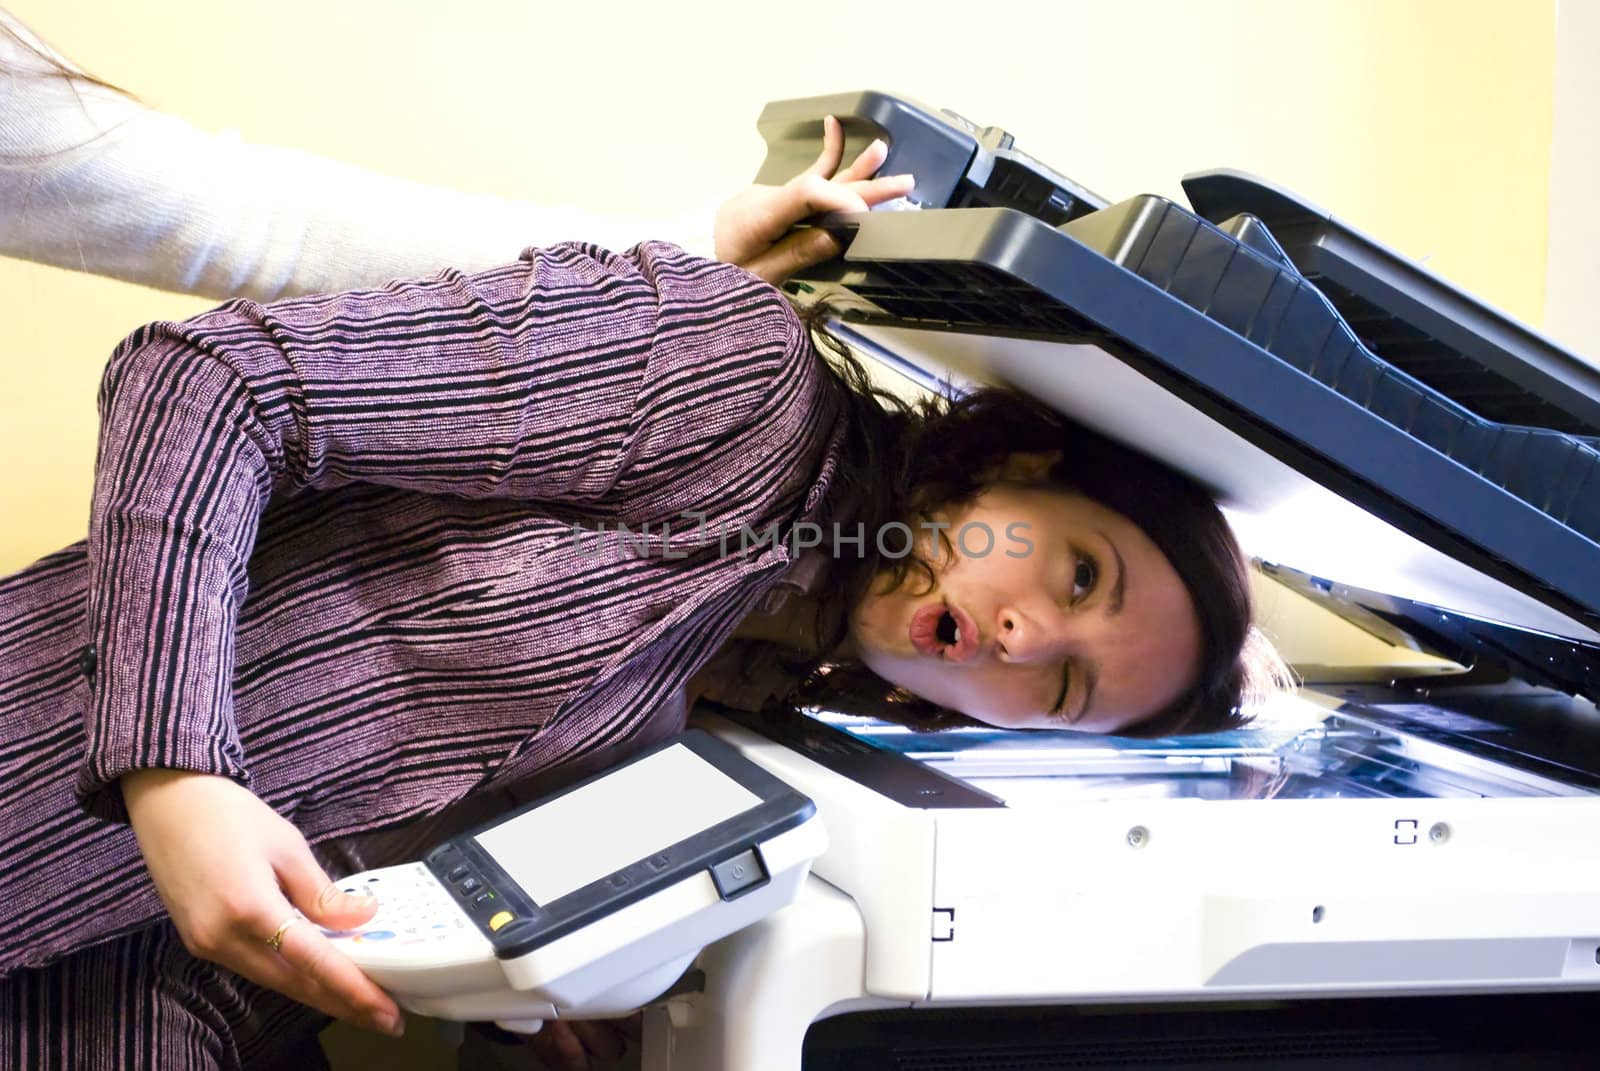 colleagues making fun in office with copier